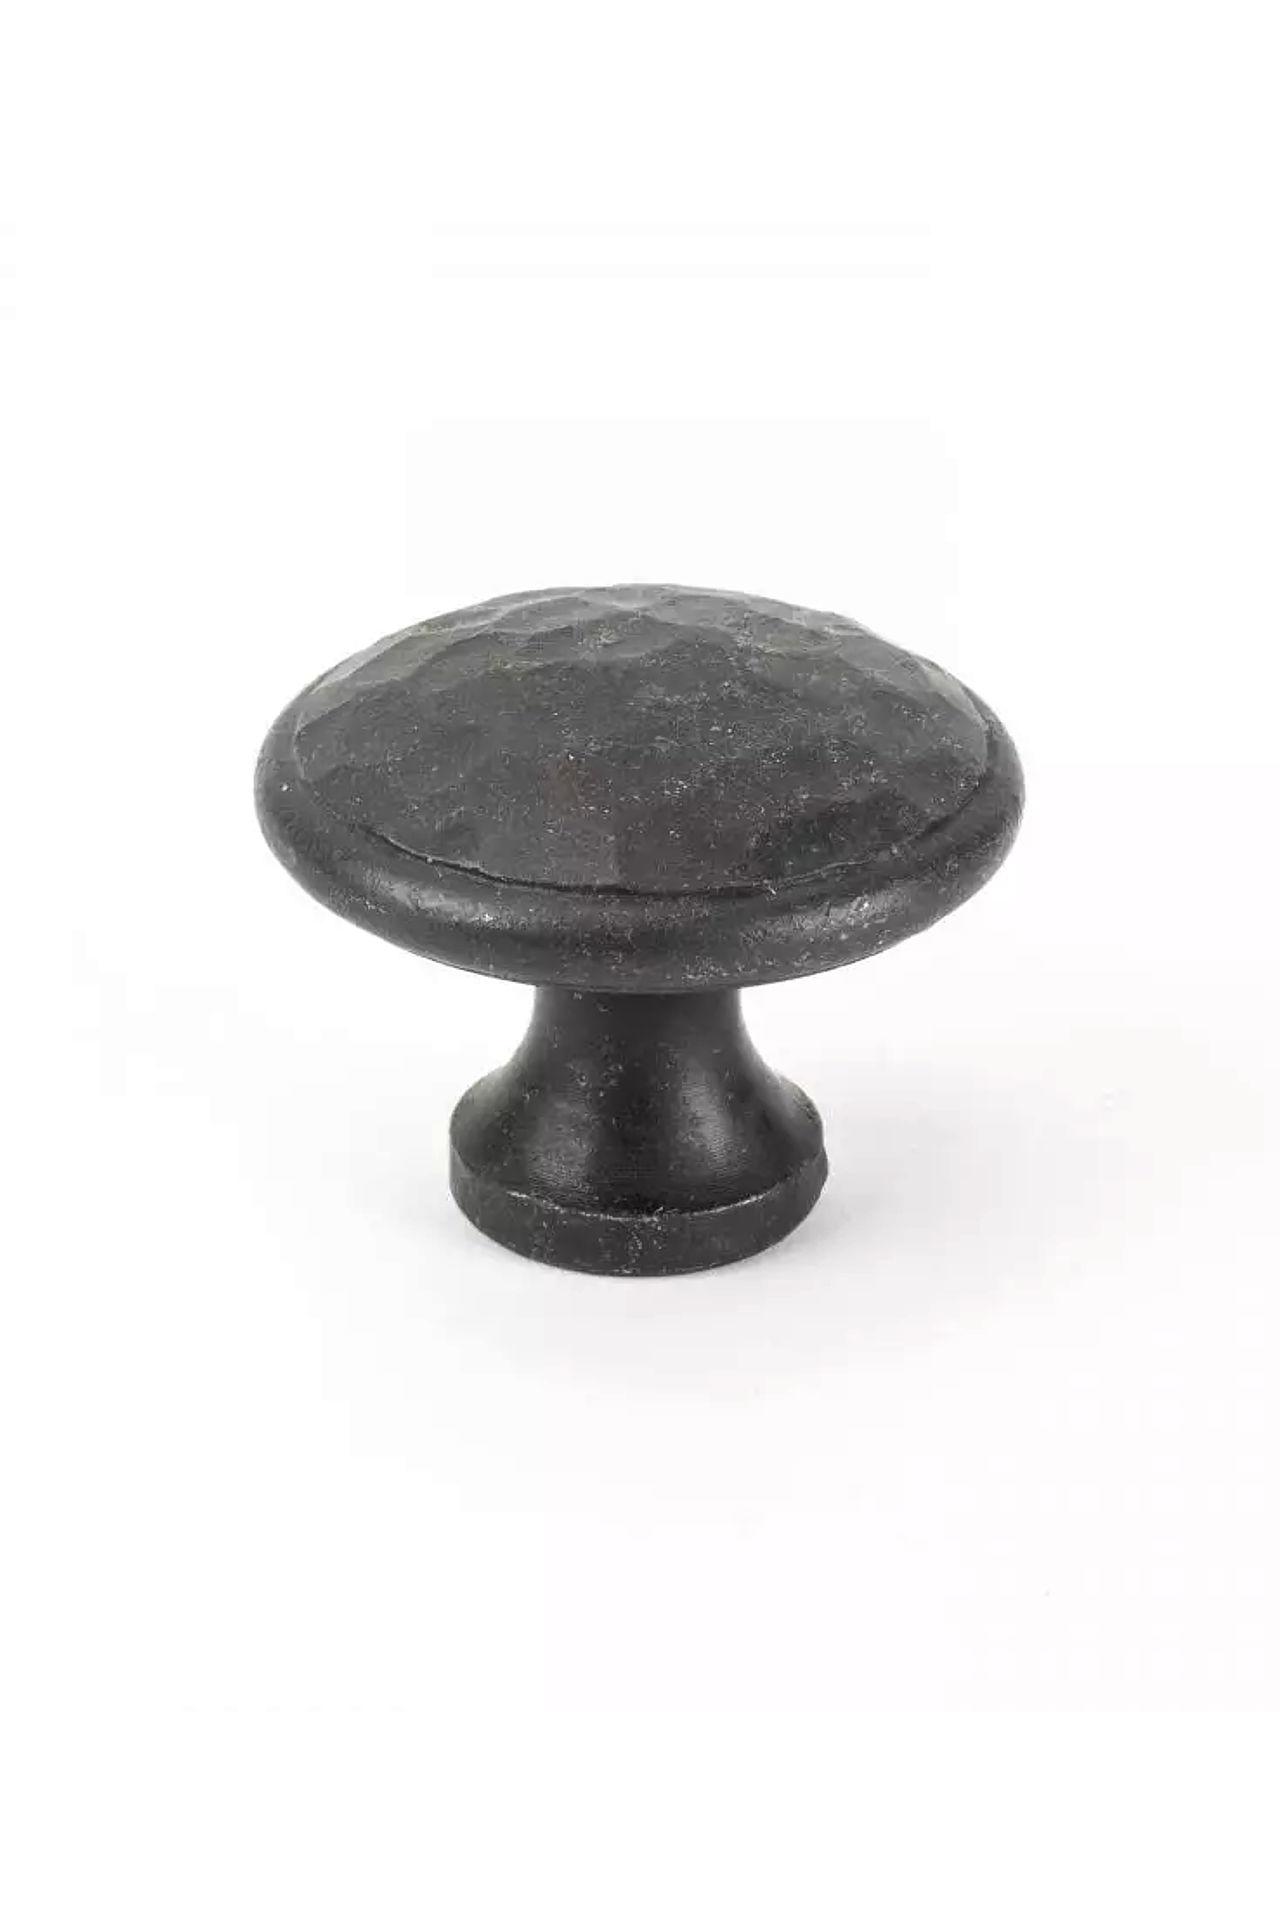 NEW From The Anvil Beeswax Beaten Cupboard Knob - Large #1